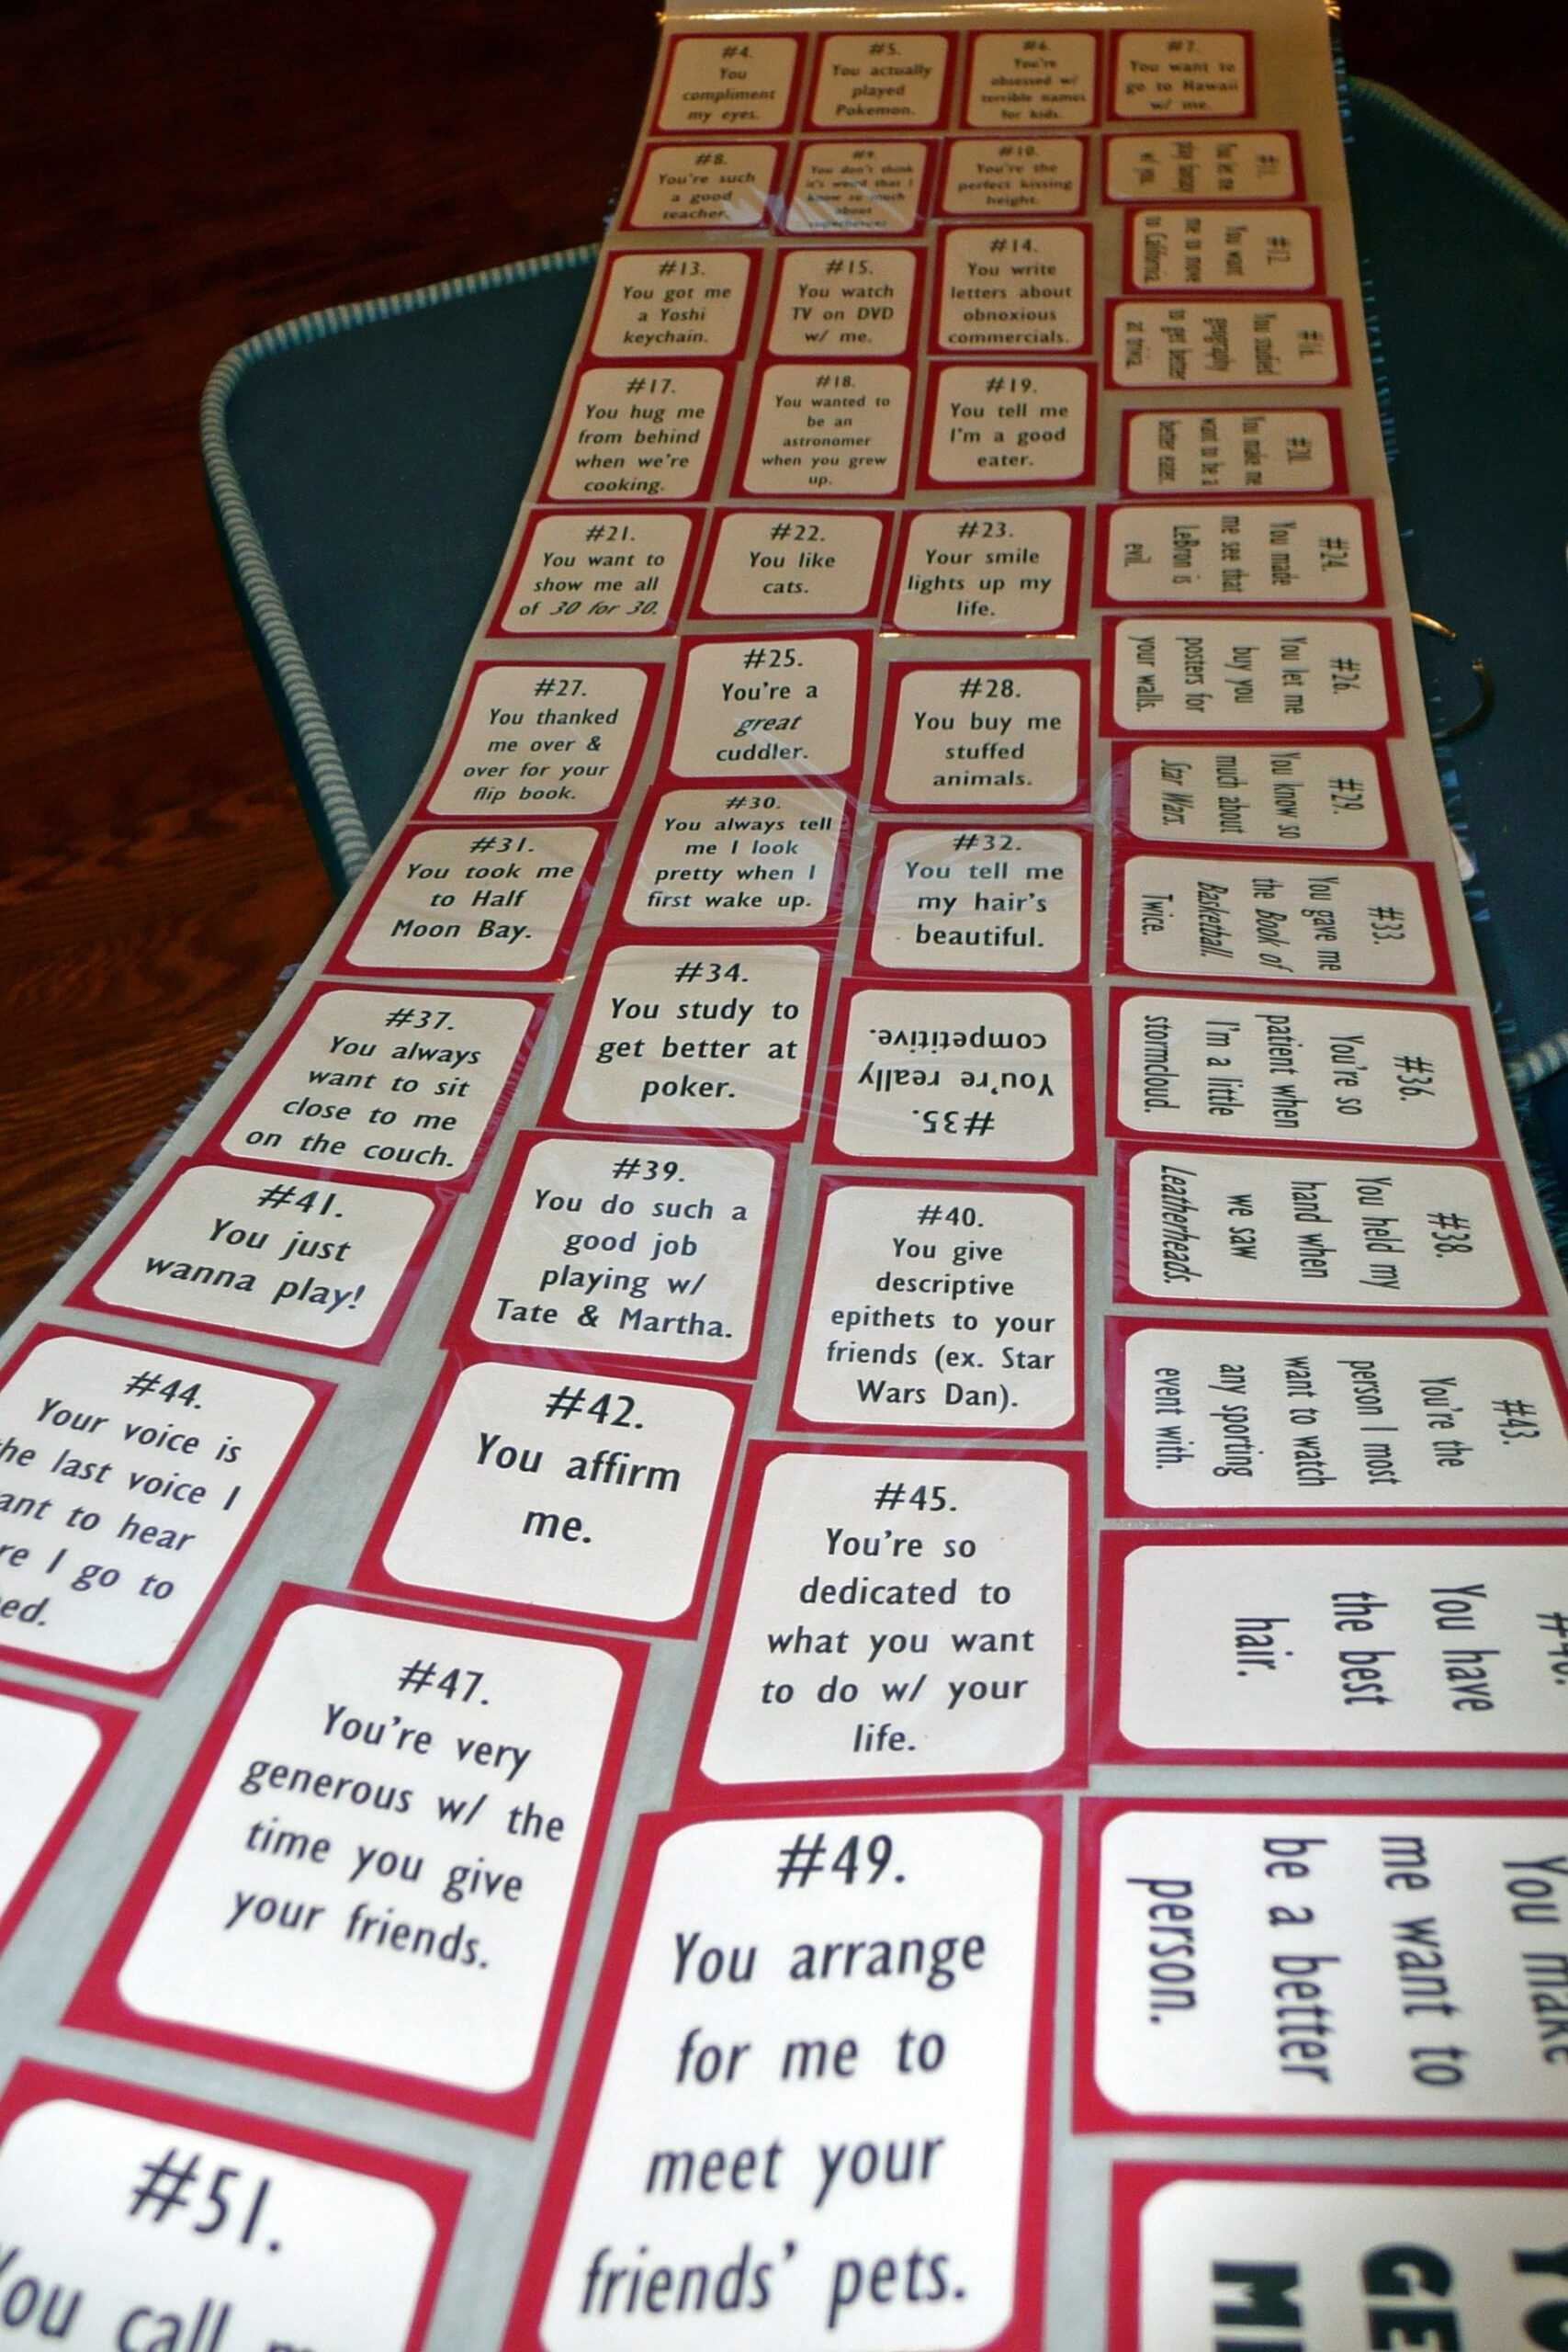 52 Reasons Why I Love You – Major.magdalene Project Intended For 52 Things I Love About You Deck Of Cards Template